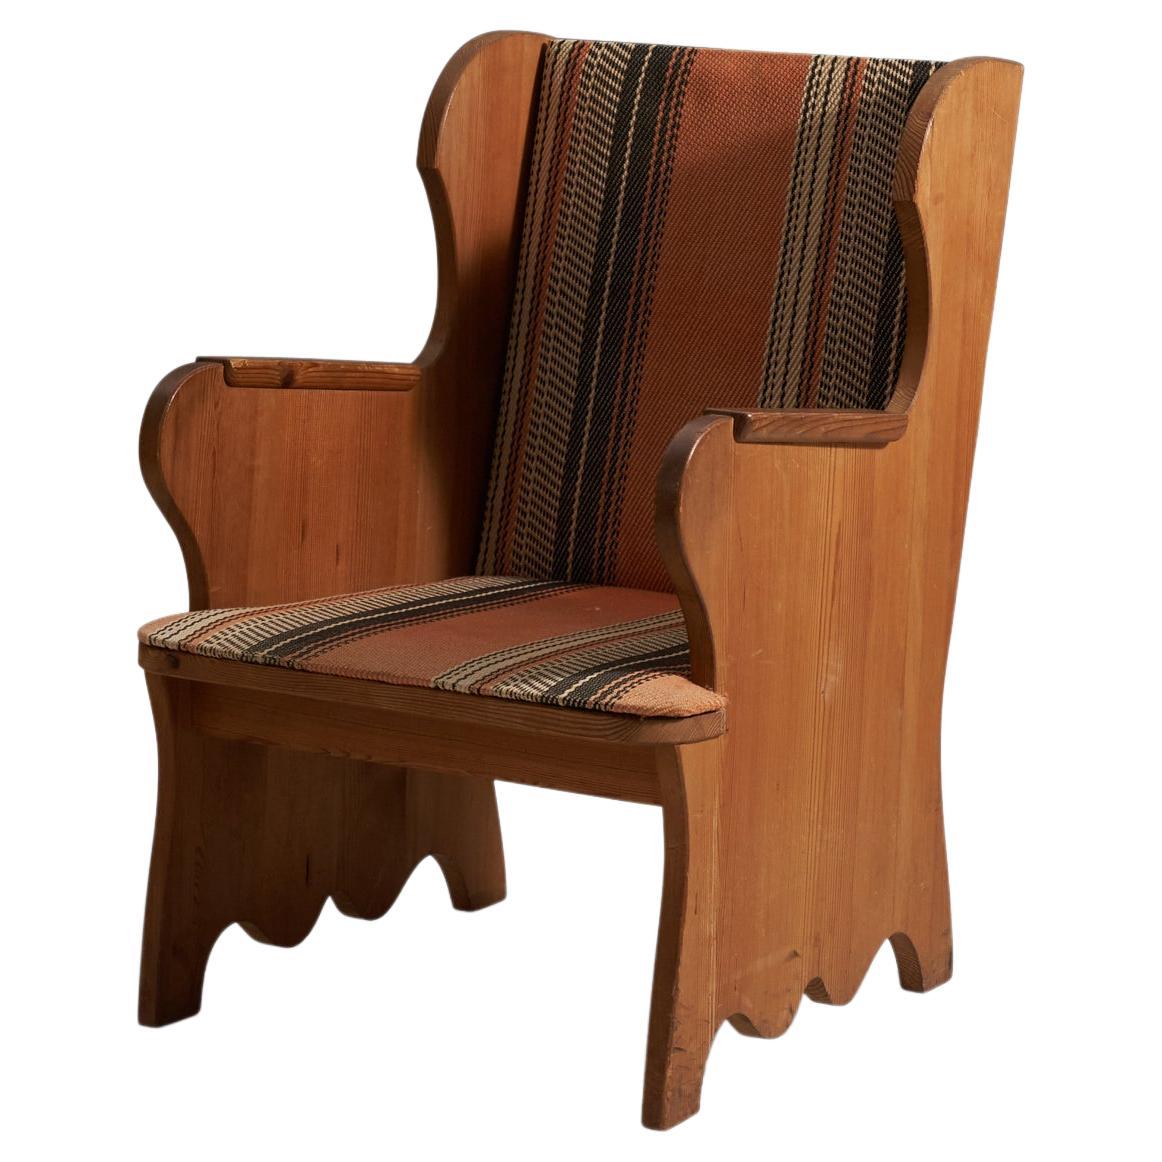 Axel Einar Hjorth, "Lovö" Lounge Chair, Stained Pine, Fabric, NK, Sweden, 1939 For Sale